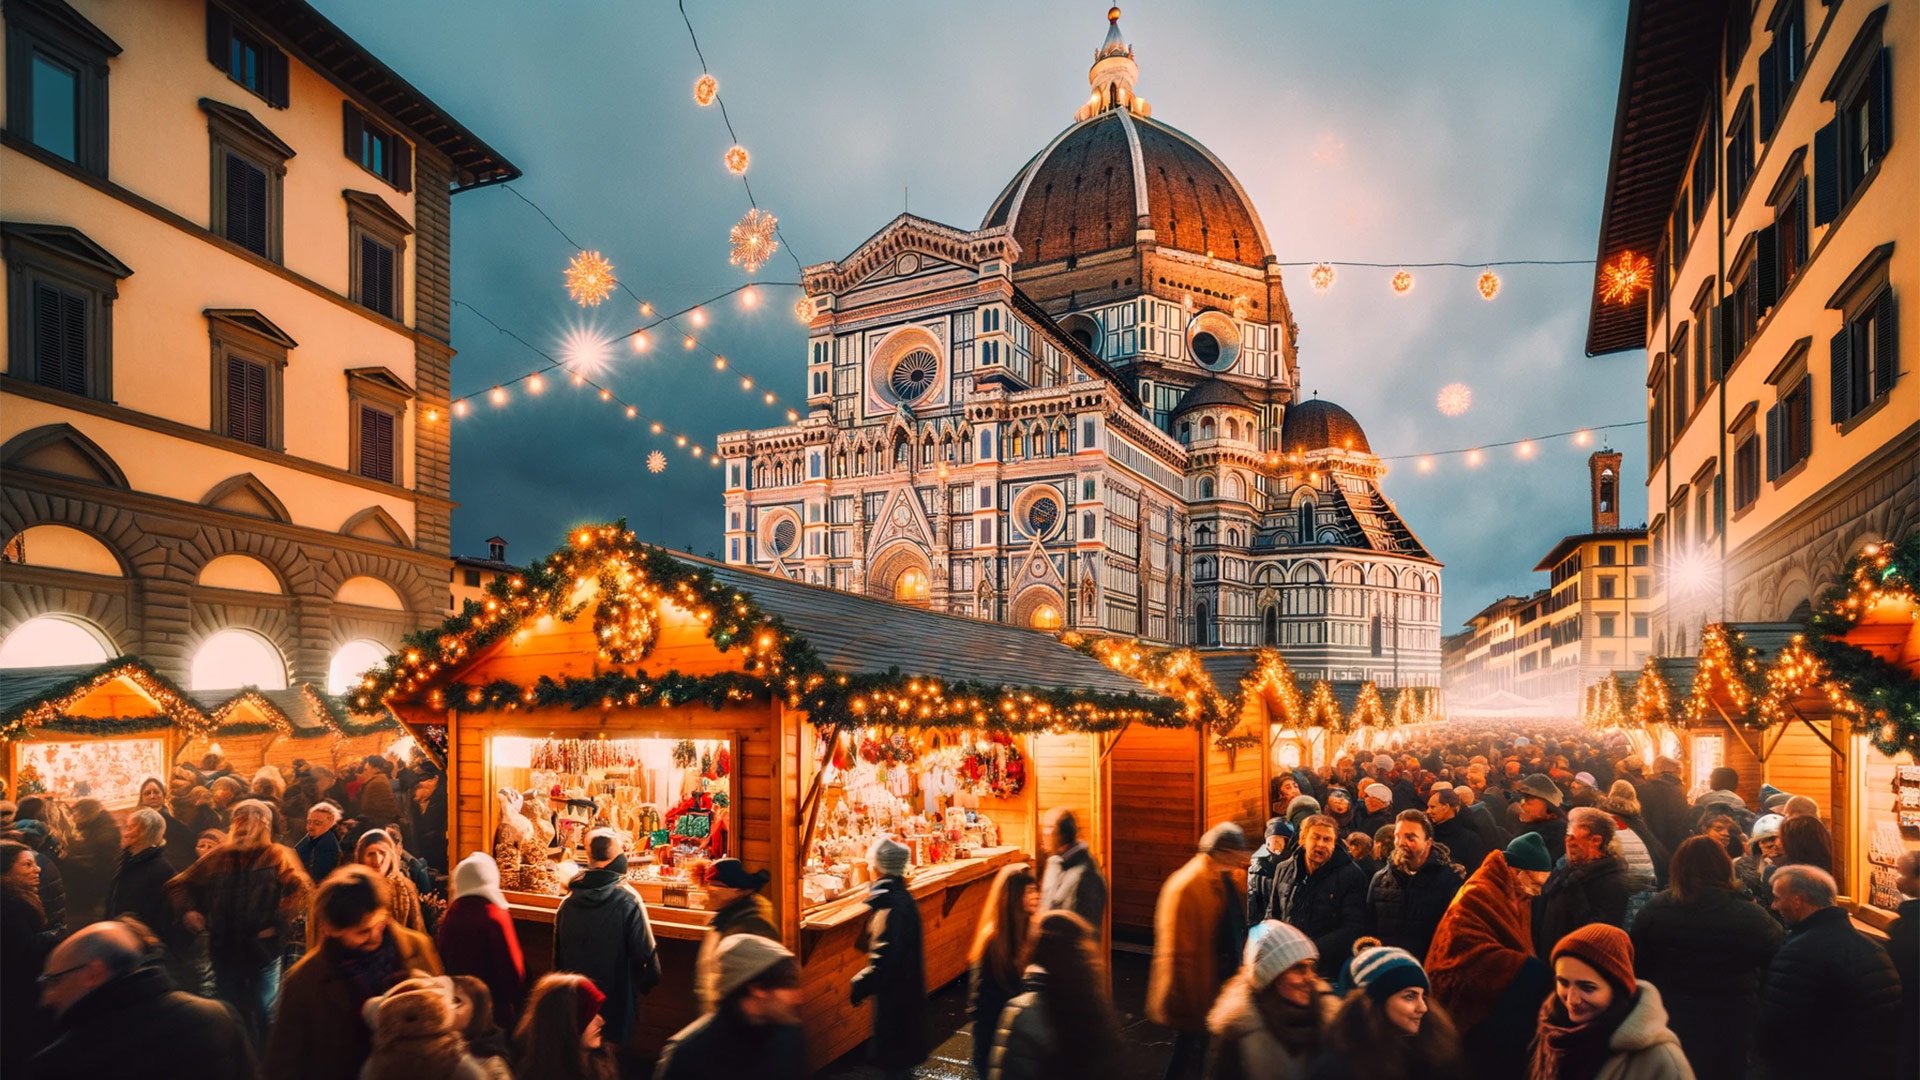 SAVE 20% ON WINTER STAYS IN FLORENCE & ROME!